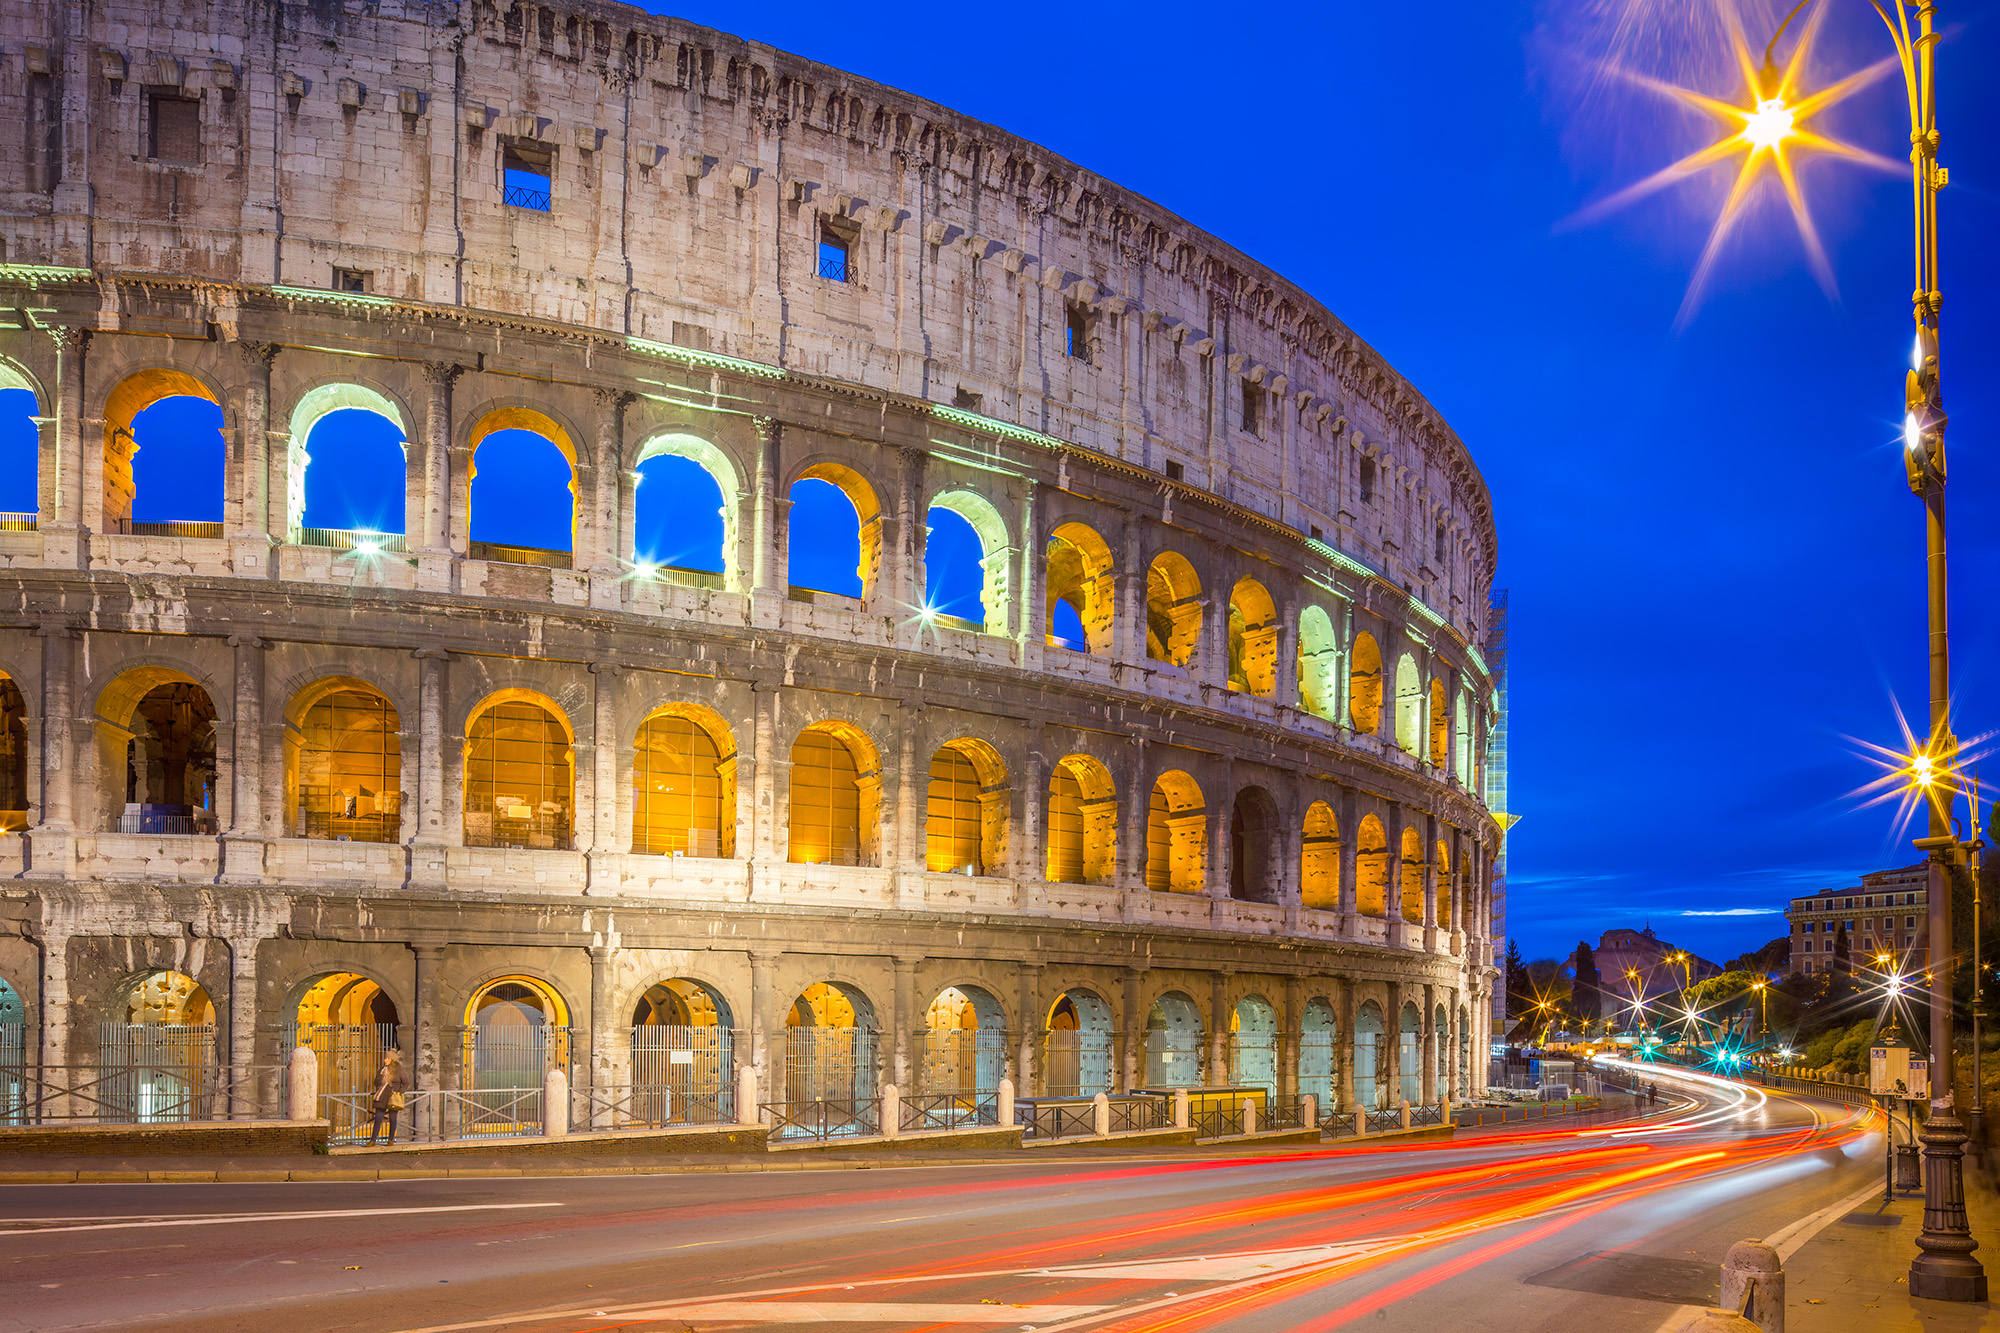 In this striking blue hour photograph of the Colosseum in Rome, Italy, the ancient amphitheater reigns supreme, illuminated with...